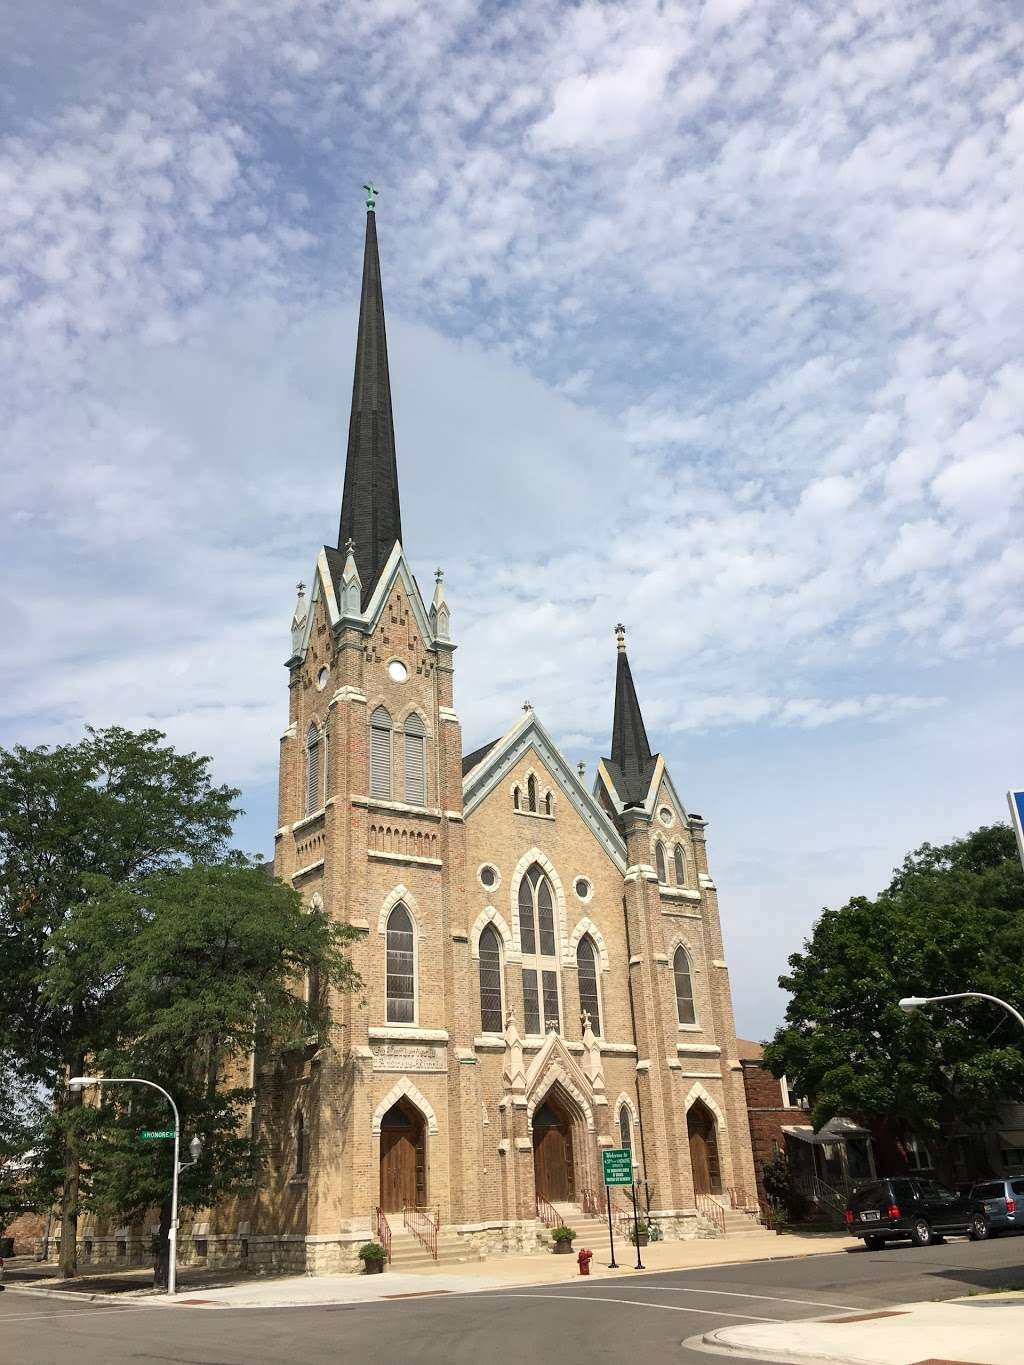 St. Andrew Lutheran Church | 3658 S Honore St, Chicago, IL 60609 | Phone: (773) 376-5370